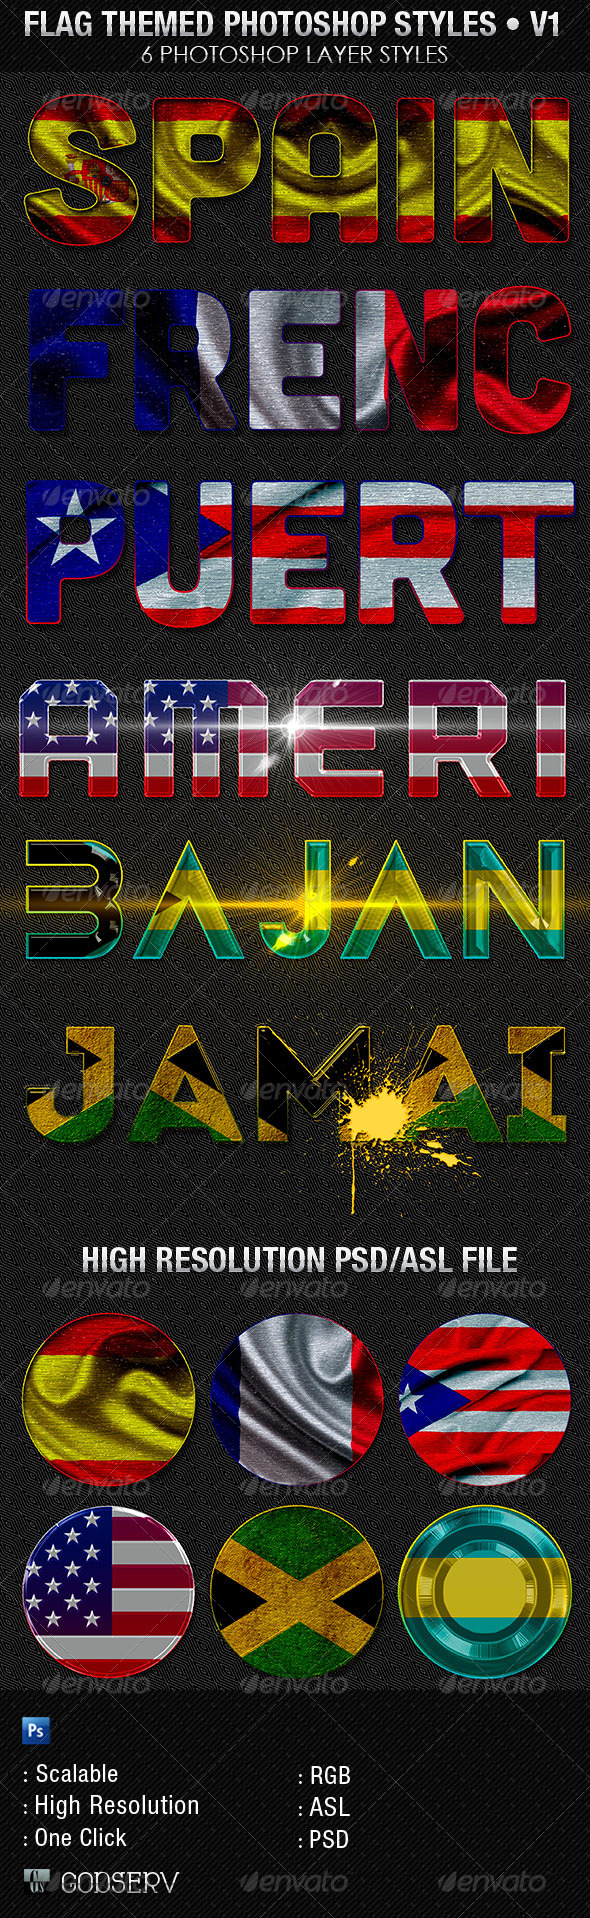 Flag Themed Photoshop Text Layer Styles – V1